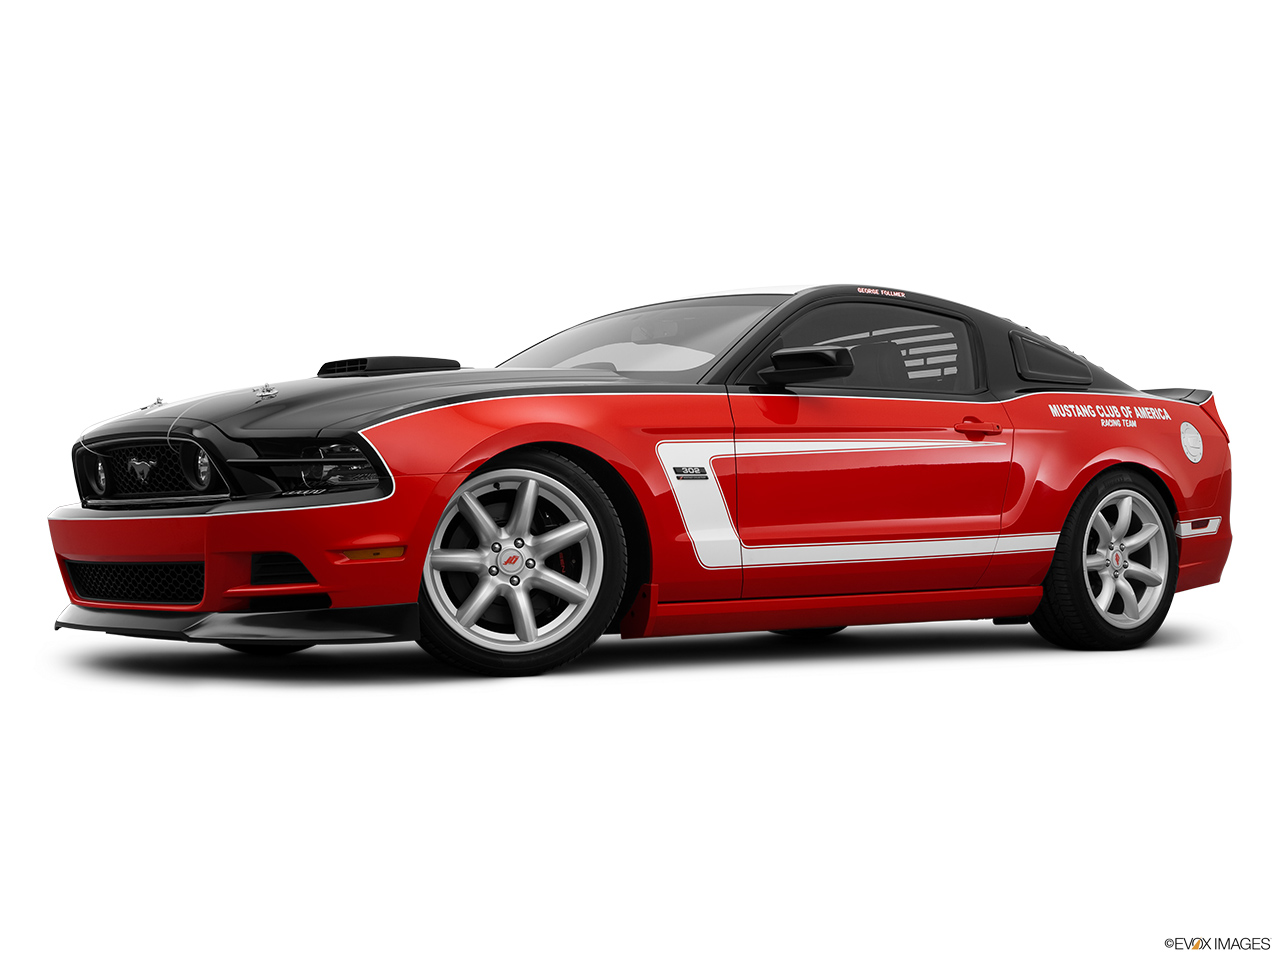 2014 Saleen George Follmer Mustang Base Low/wide front 5/8. 